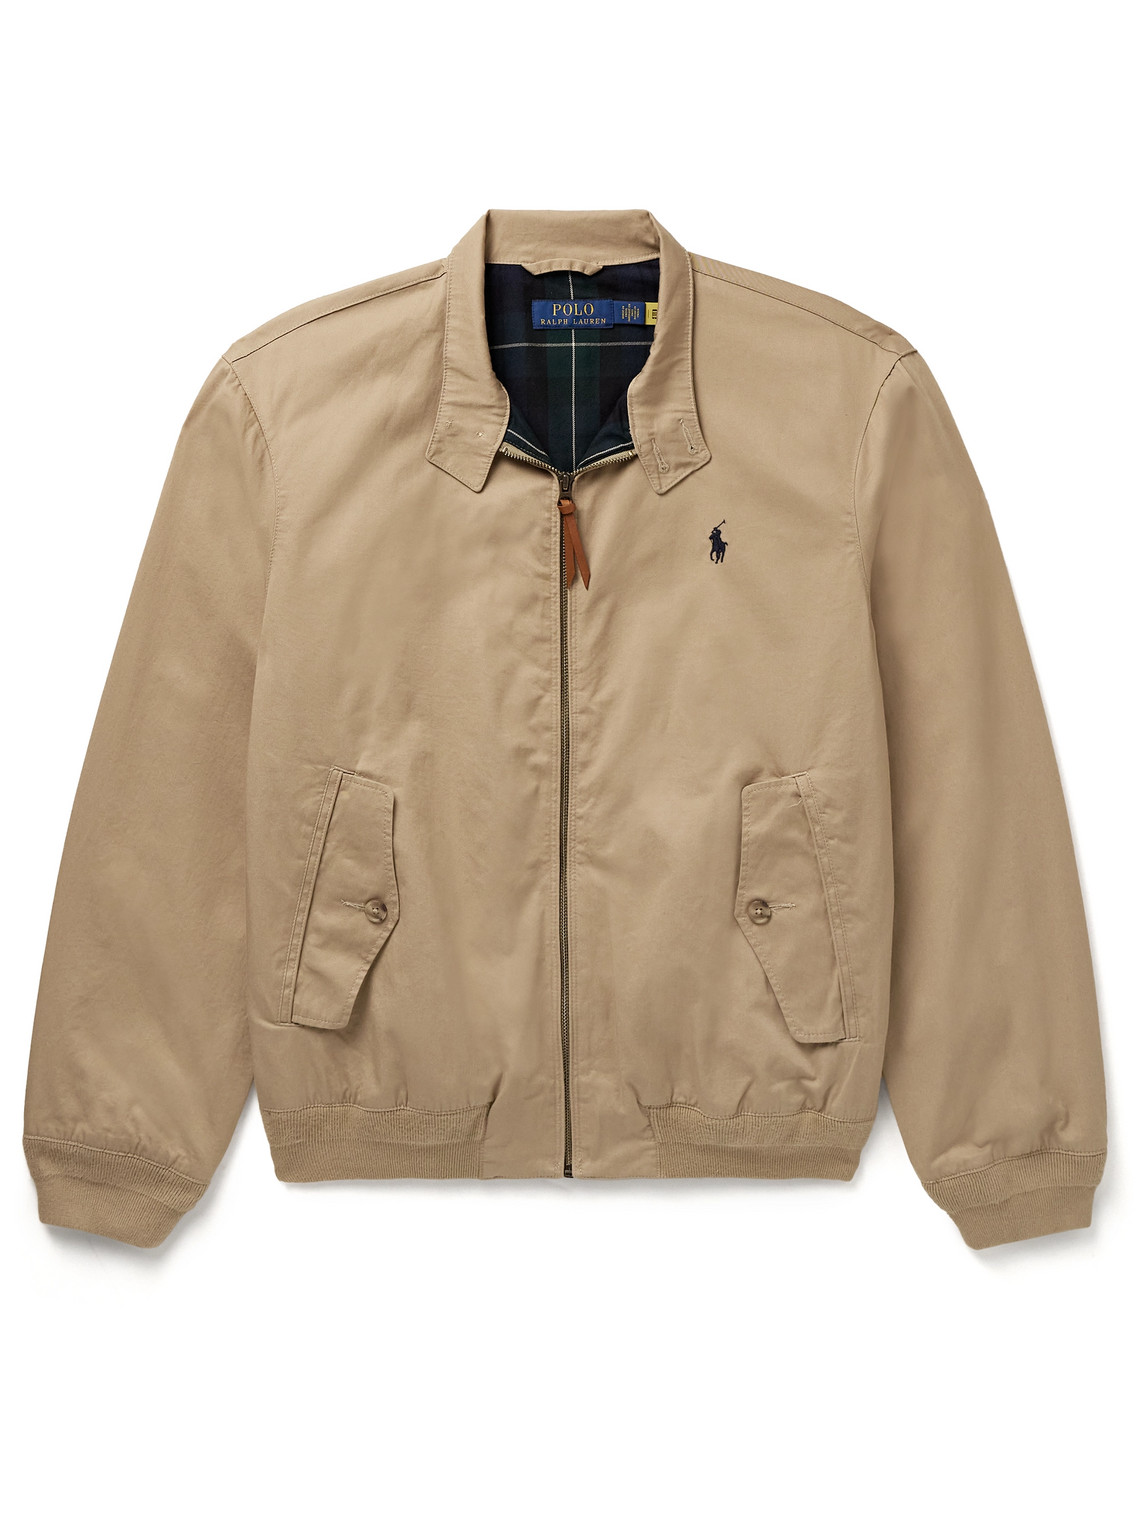 Polo Ralph Lauren - Logo-Embroidered Cotton-Twill Bomber Jacket